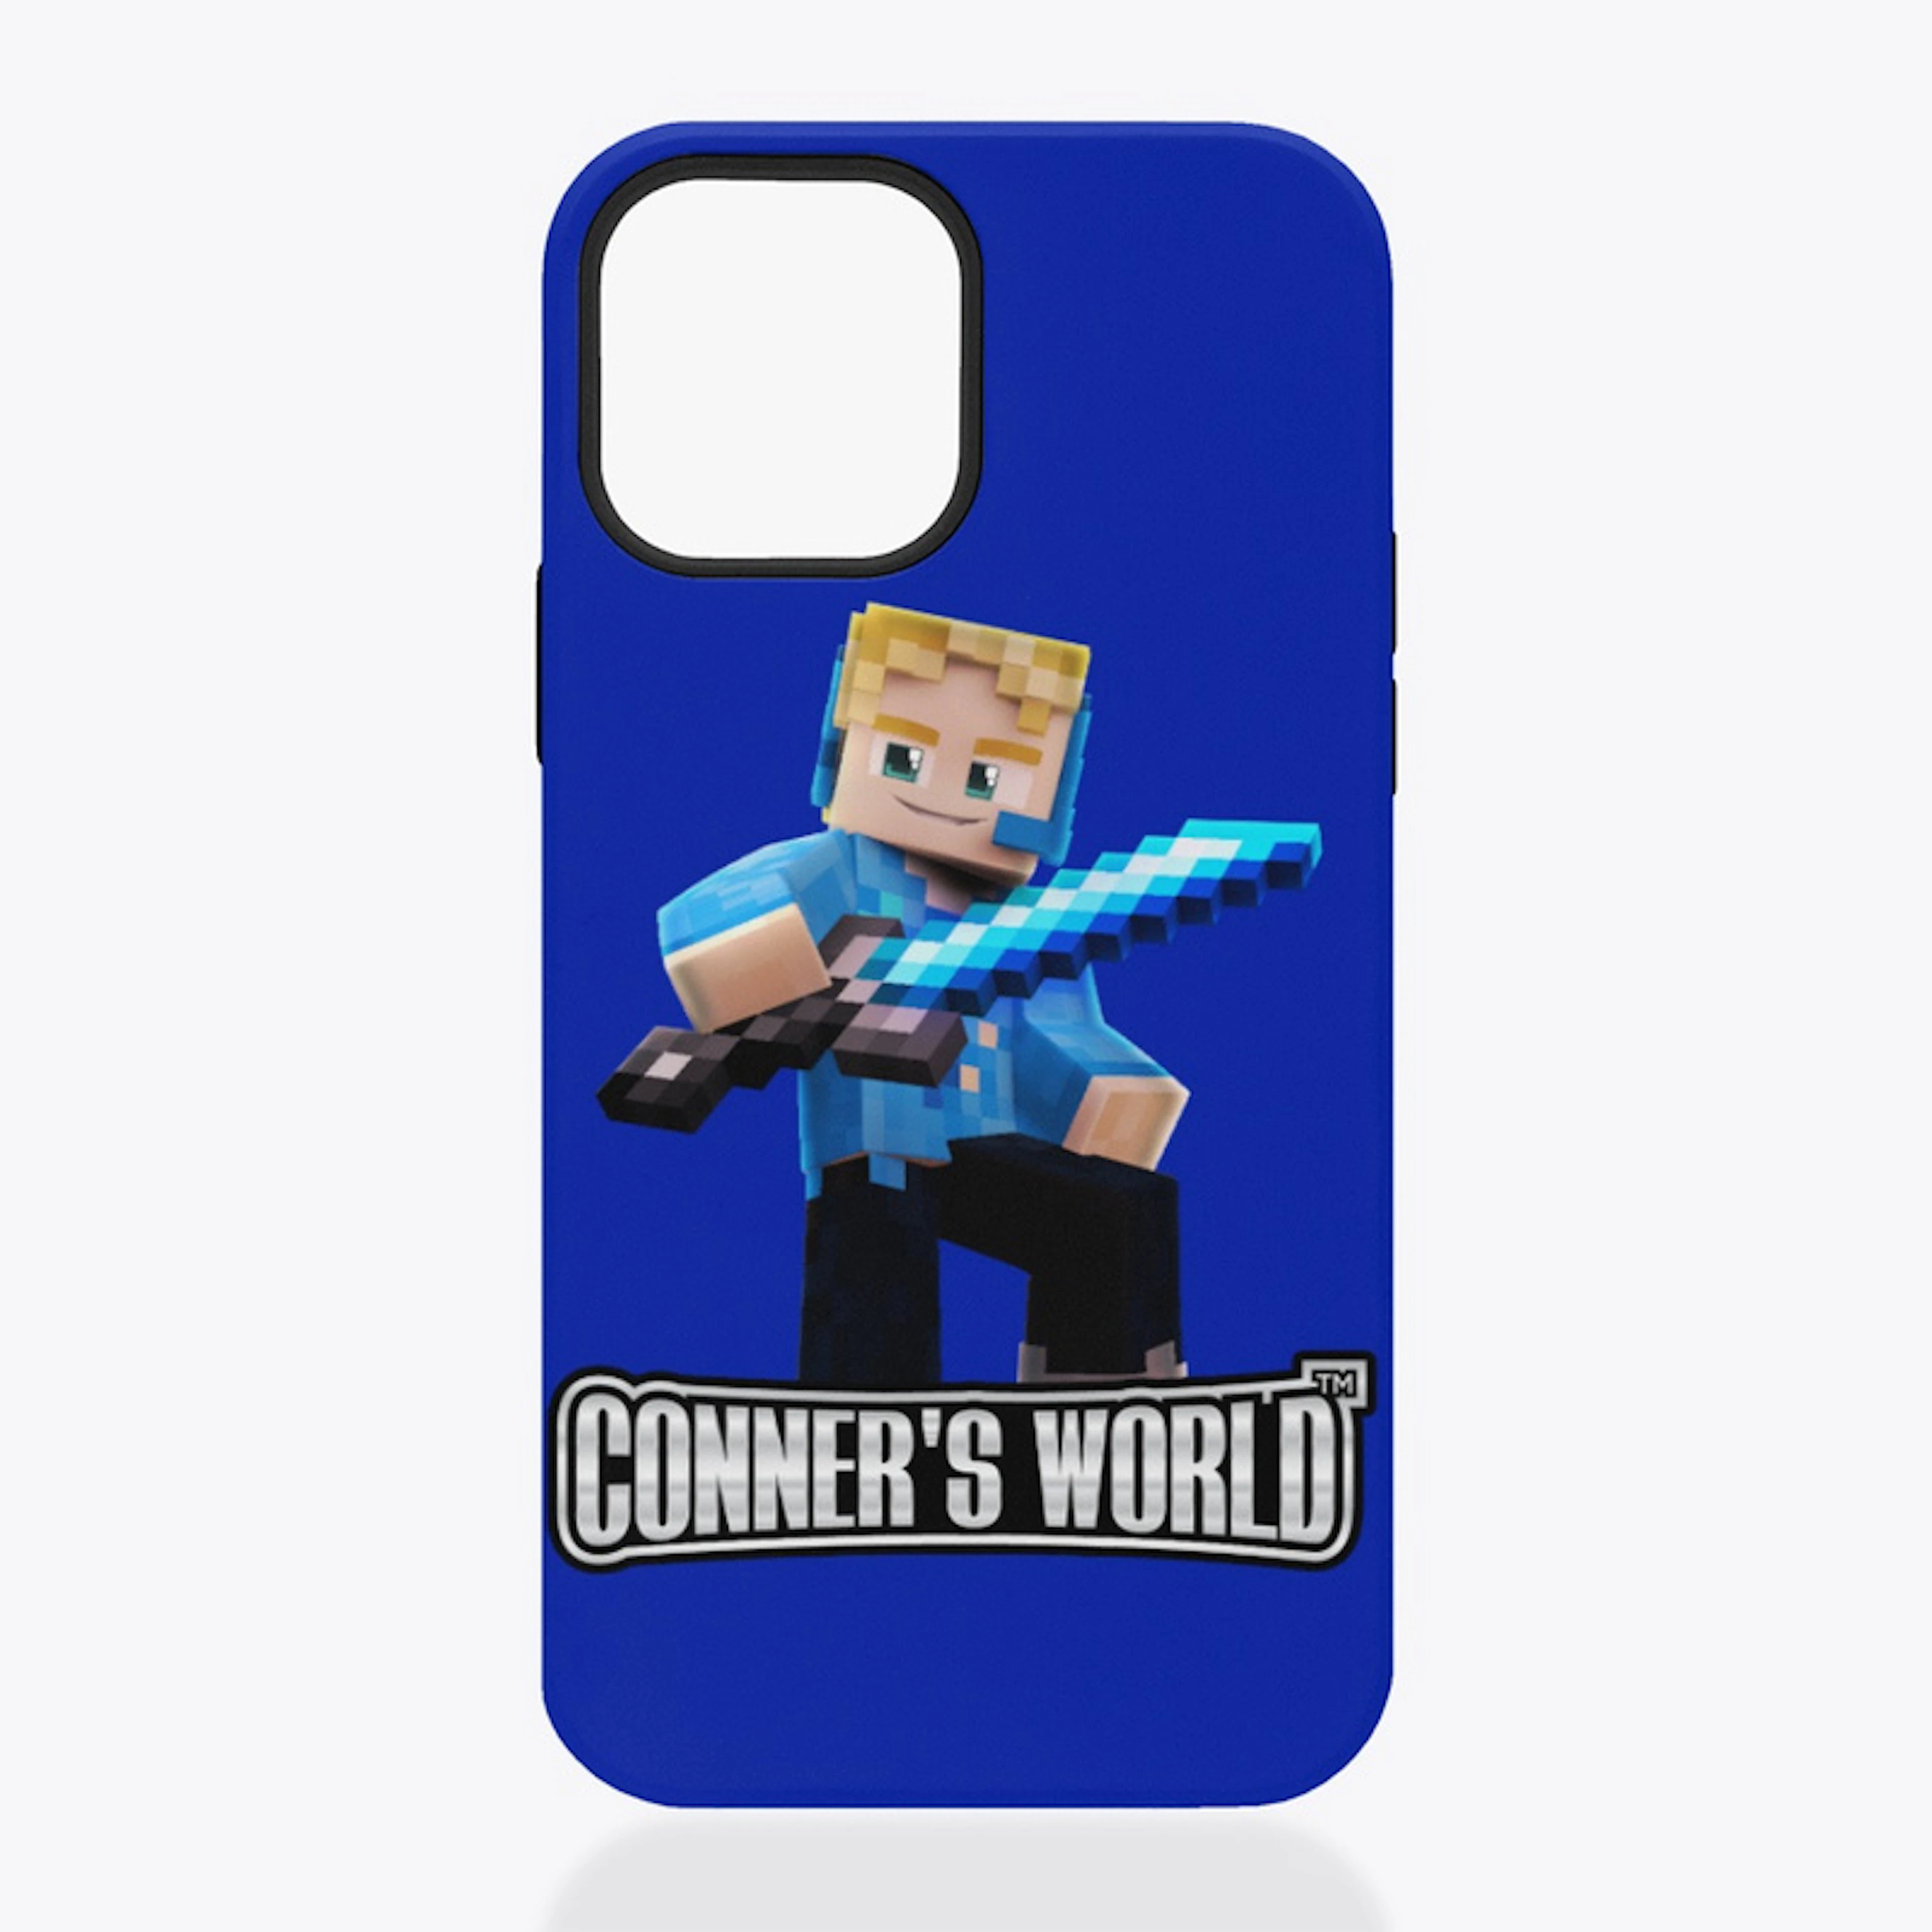 Conner's World iPhone Phone Case